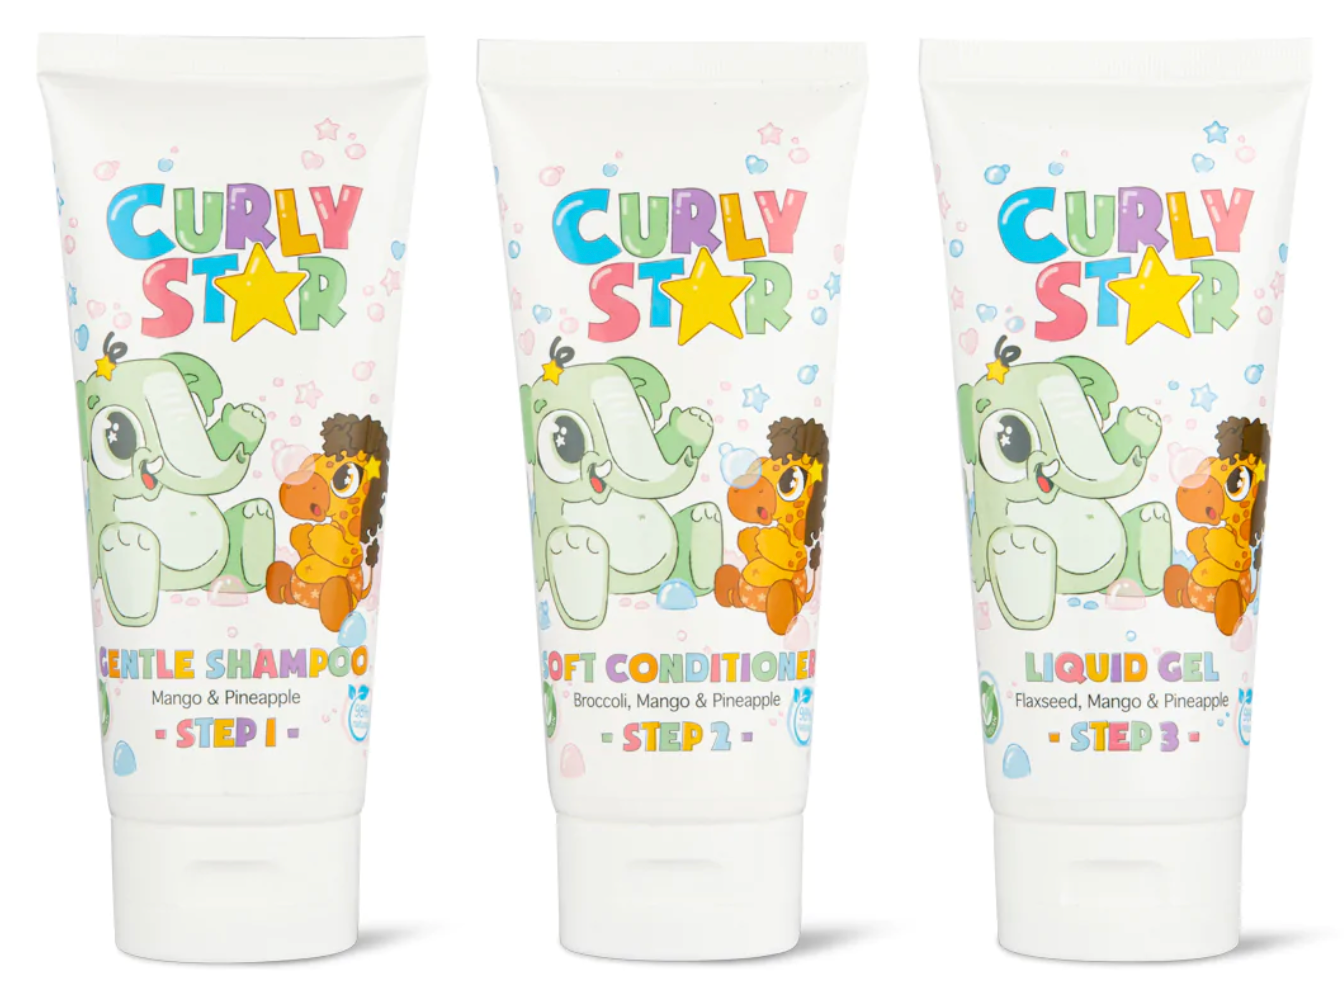 Curly Star - Bundle set - 3 products